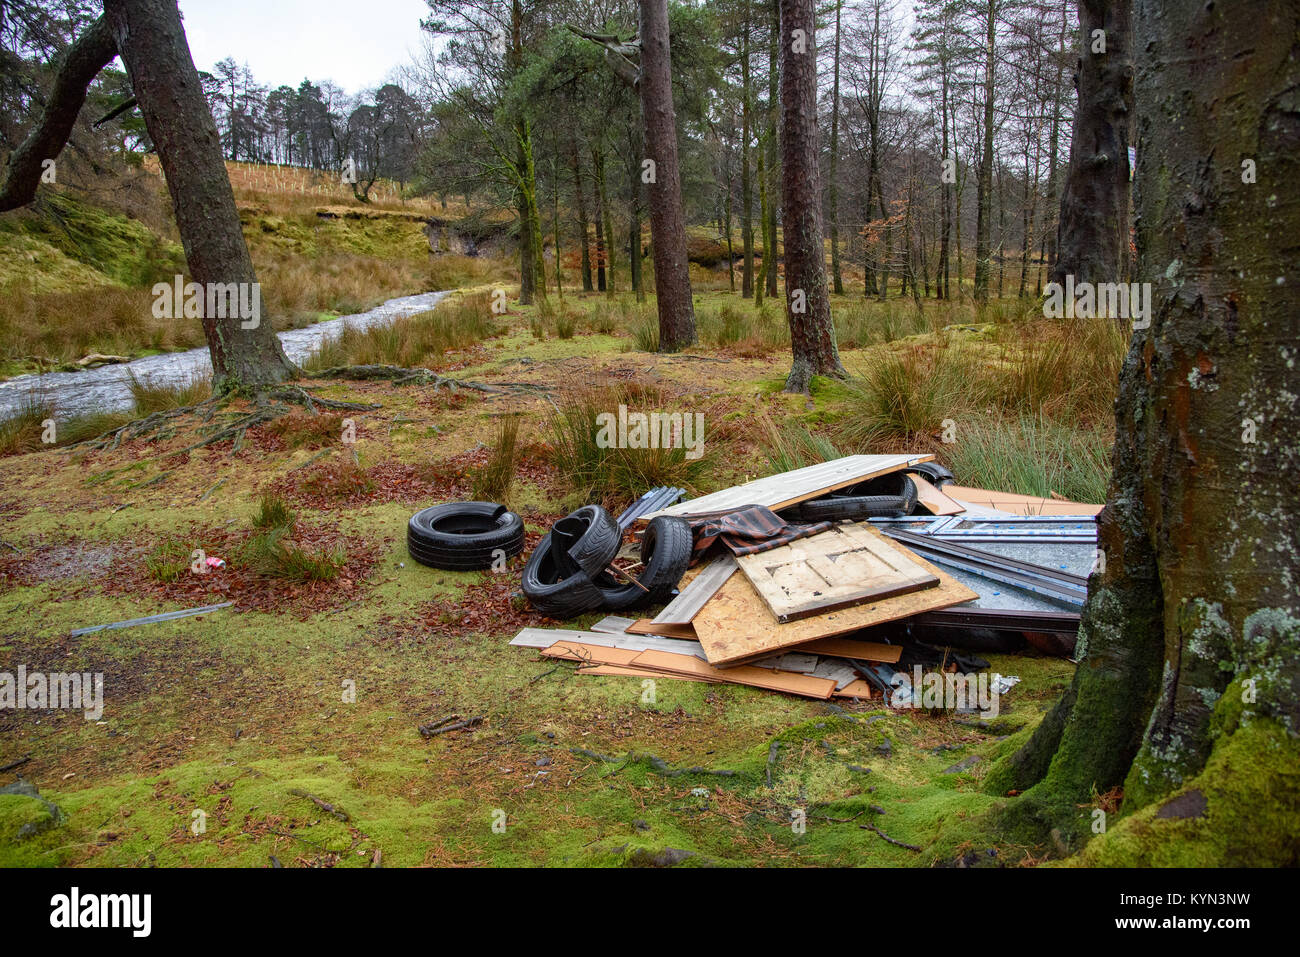 Fly tipping in an Area of Outstanding Natural Beauty. Rubbish dumped in the Forest of Bowland, Marshaw, Lancaster, Lancashire, United Kingdom. 15.1.18 Stock Photo